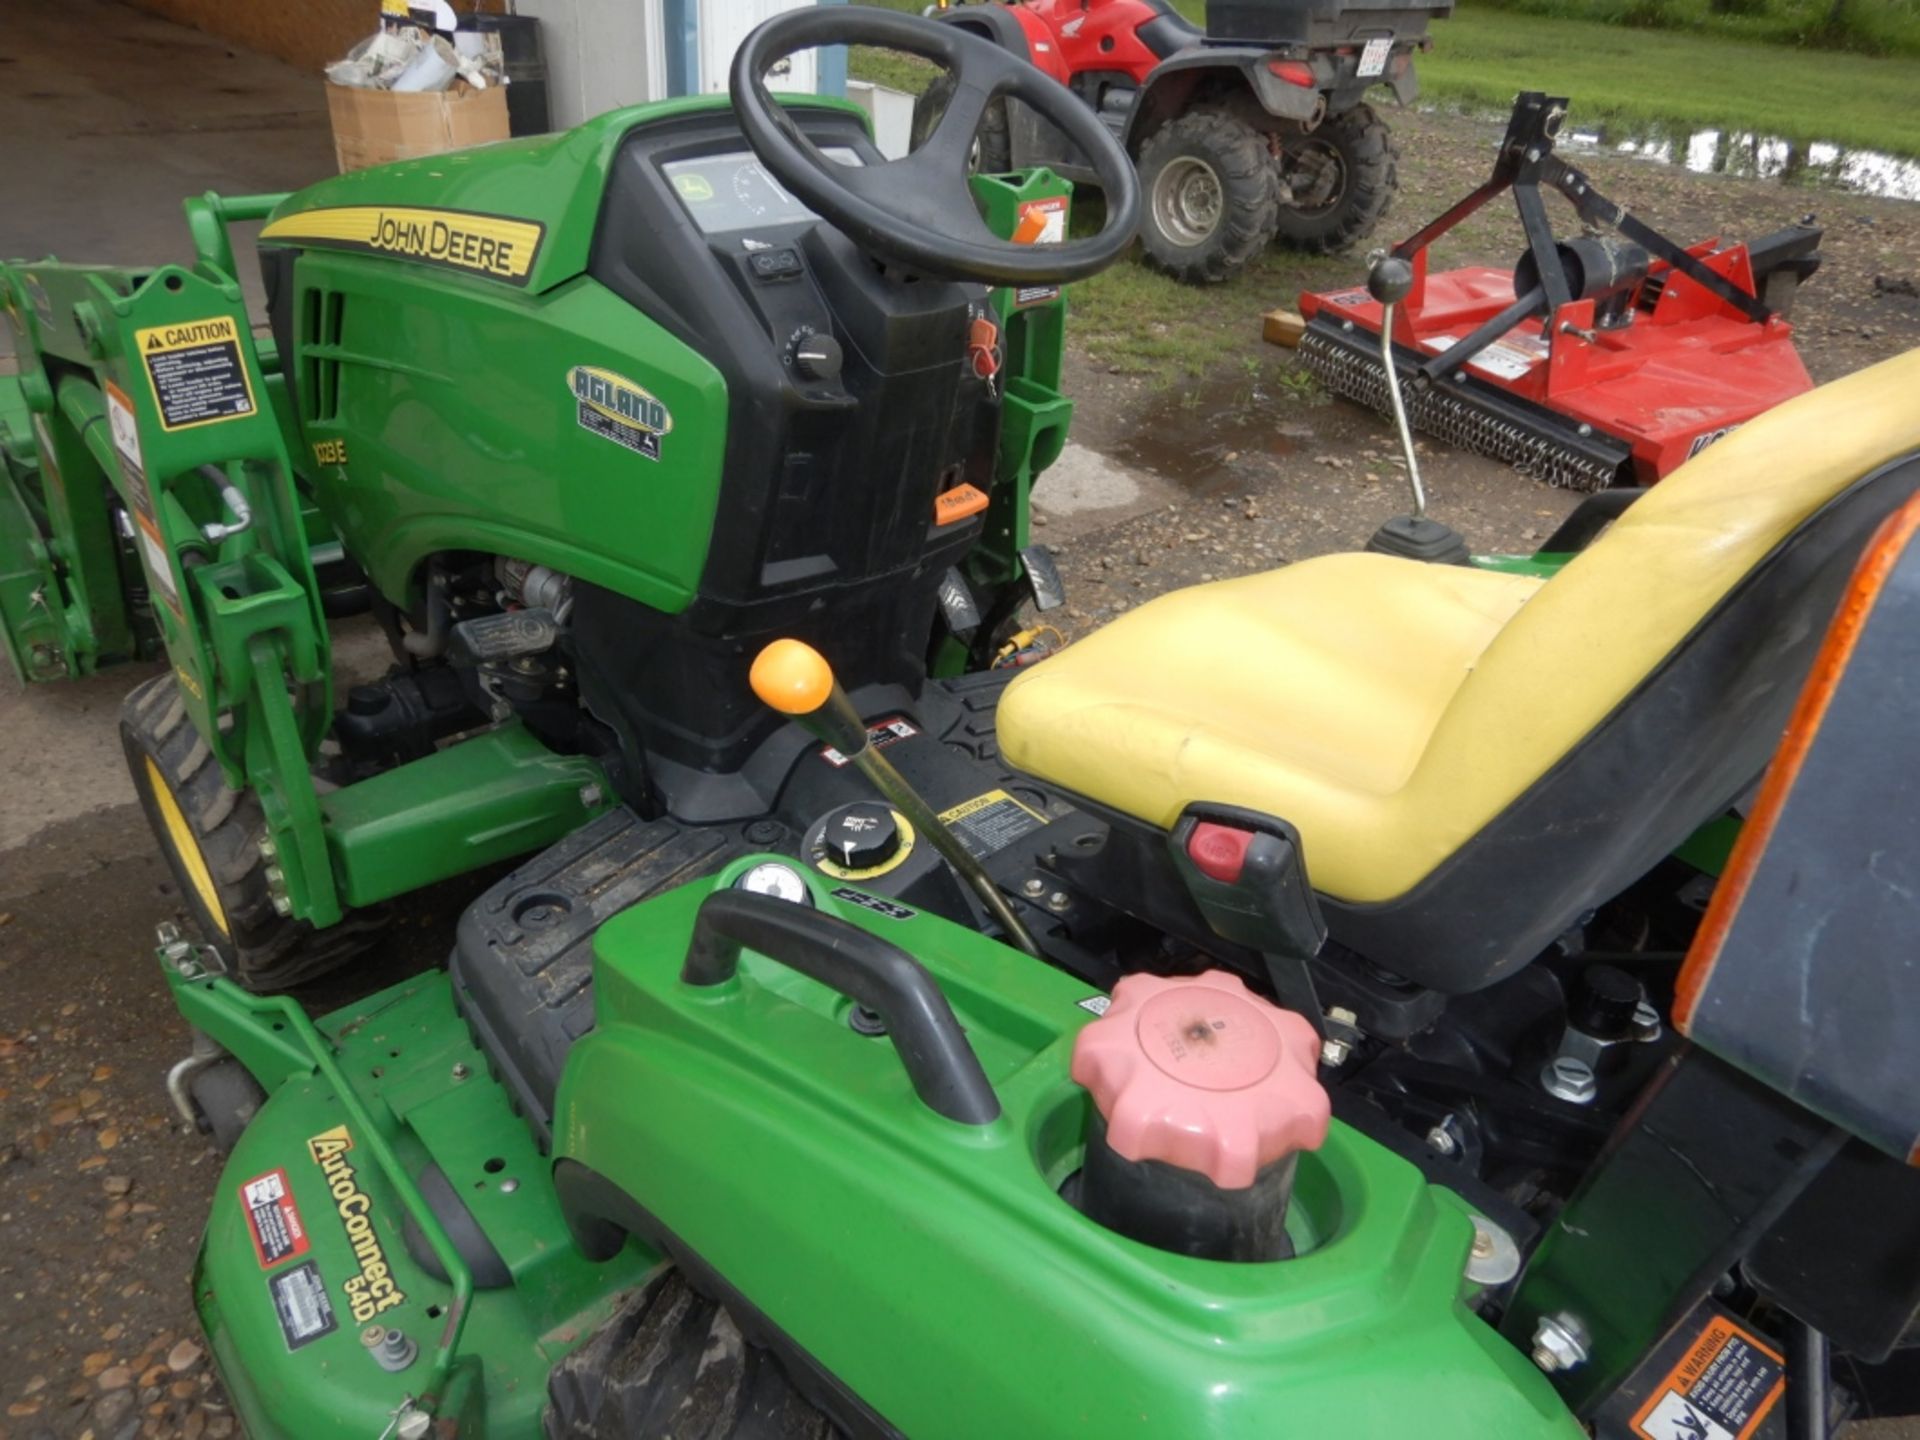 2012 JOHN DEERE 1023E 4WD COMPACT TRACTOR W/ FRONT END LOADER, 3 HYDRAULICS, DELUXE HOOD GUARD, - Image 6 of 11